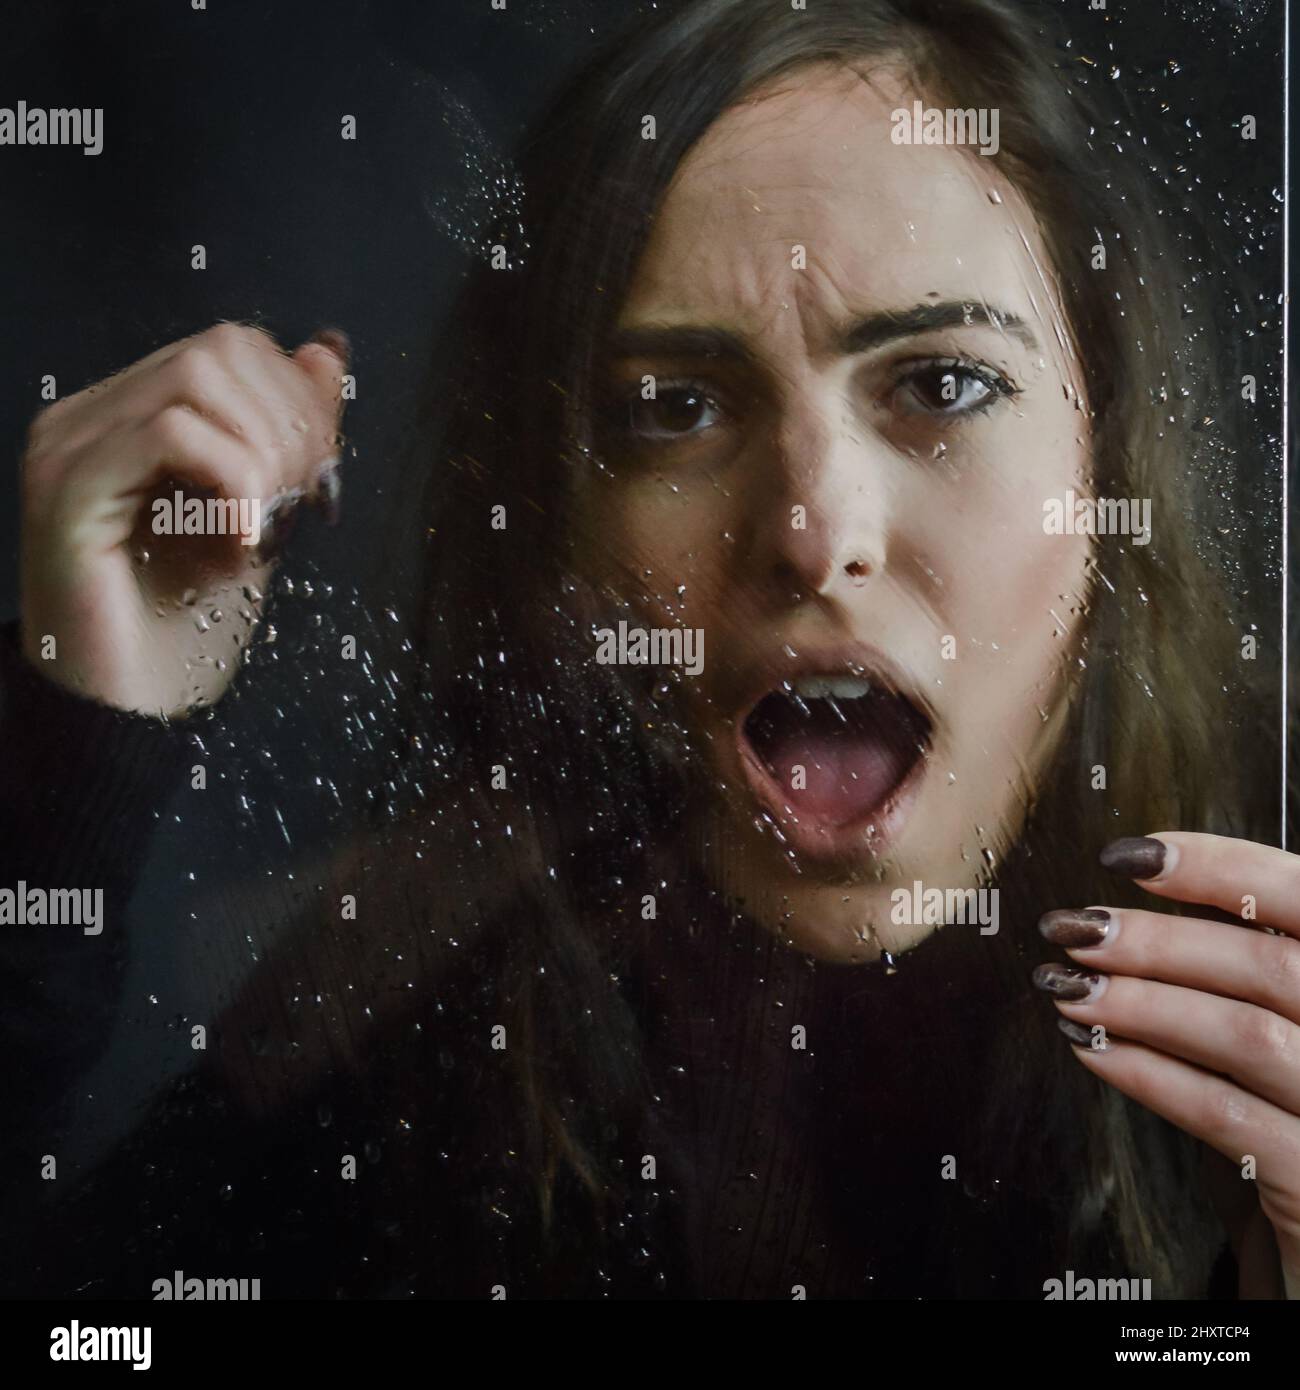 Portrait Of A Beautiful Girl Screaming And Placing Her Fist On A Wet Glass That She Holds